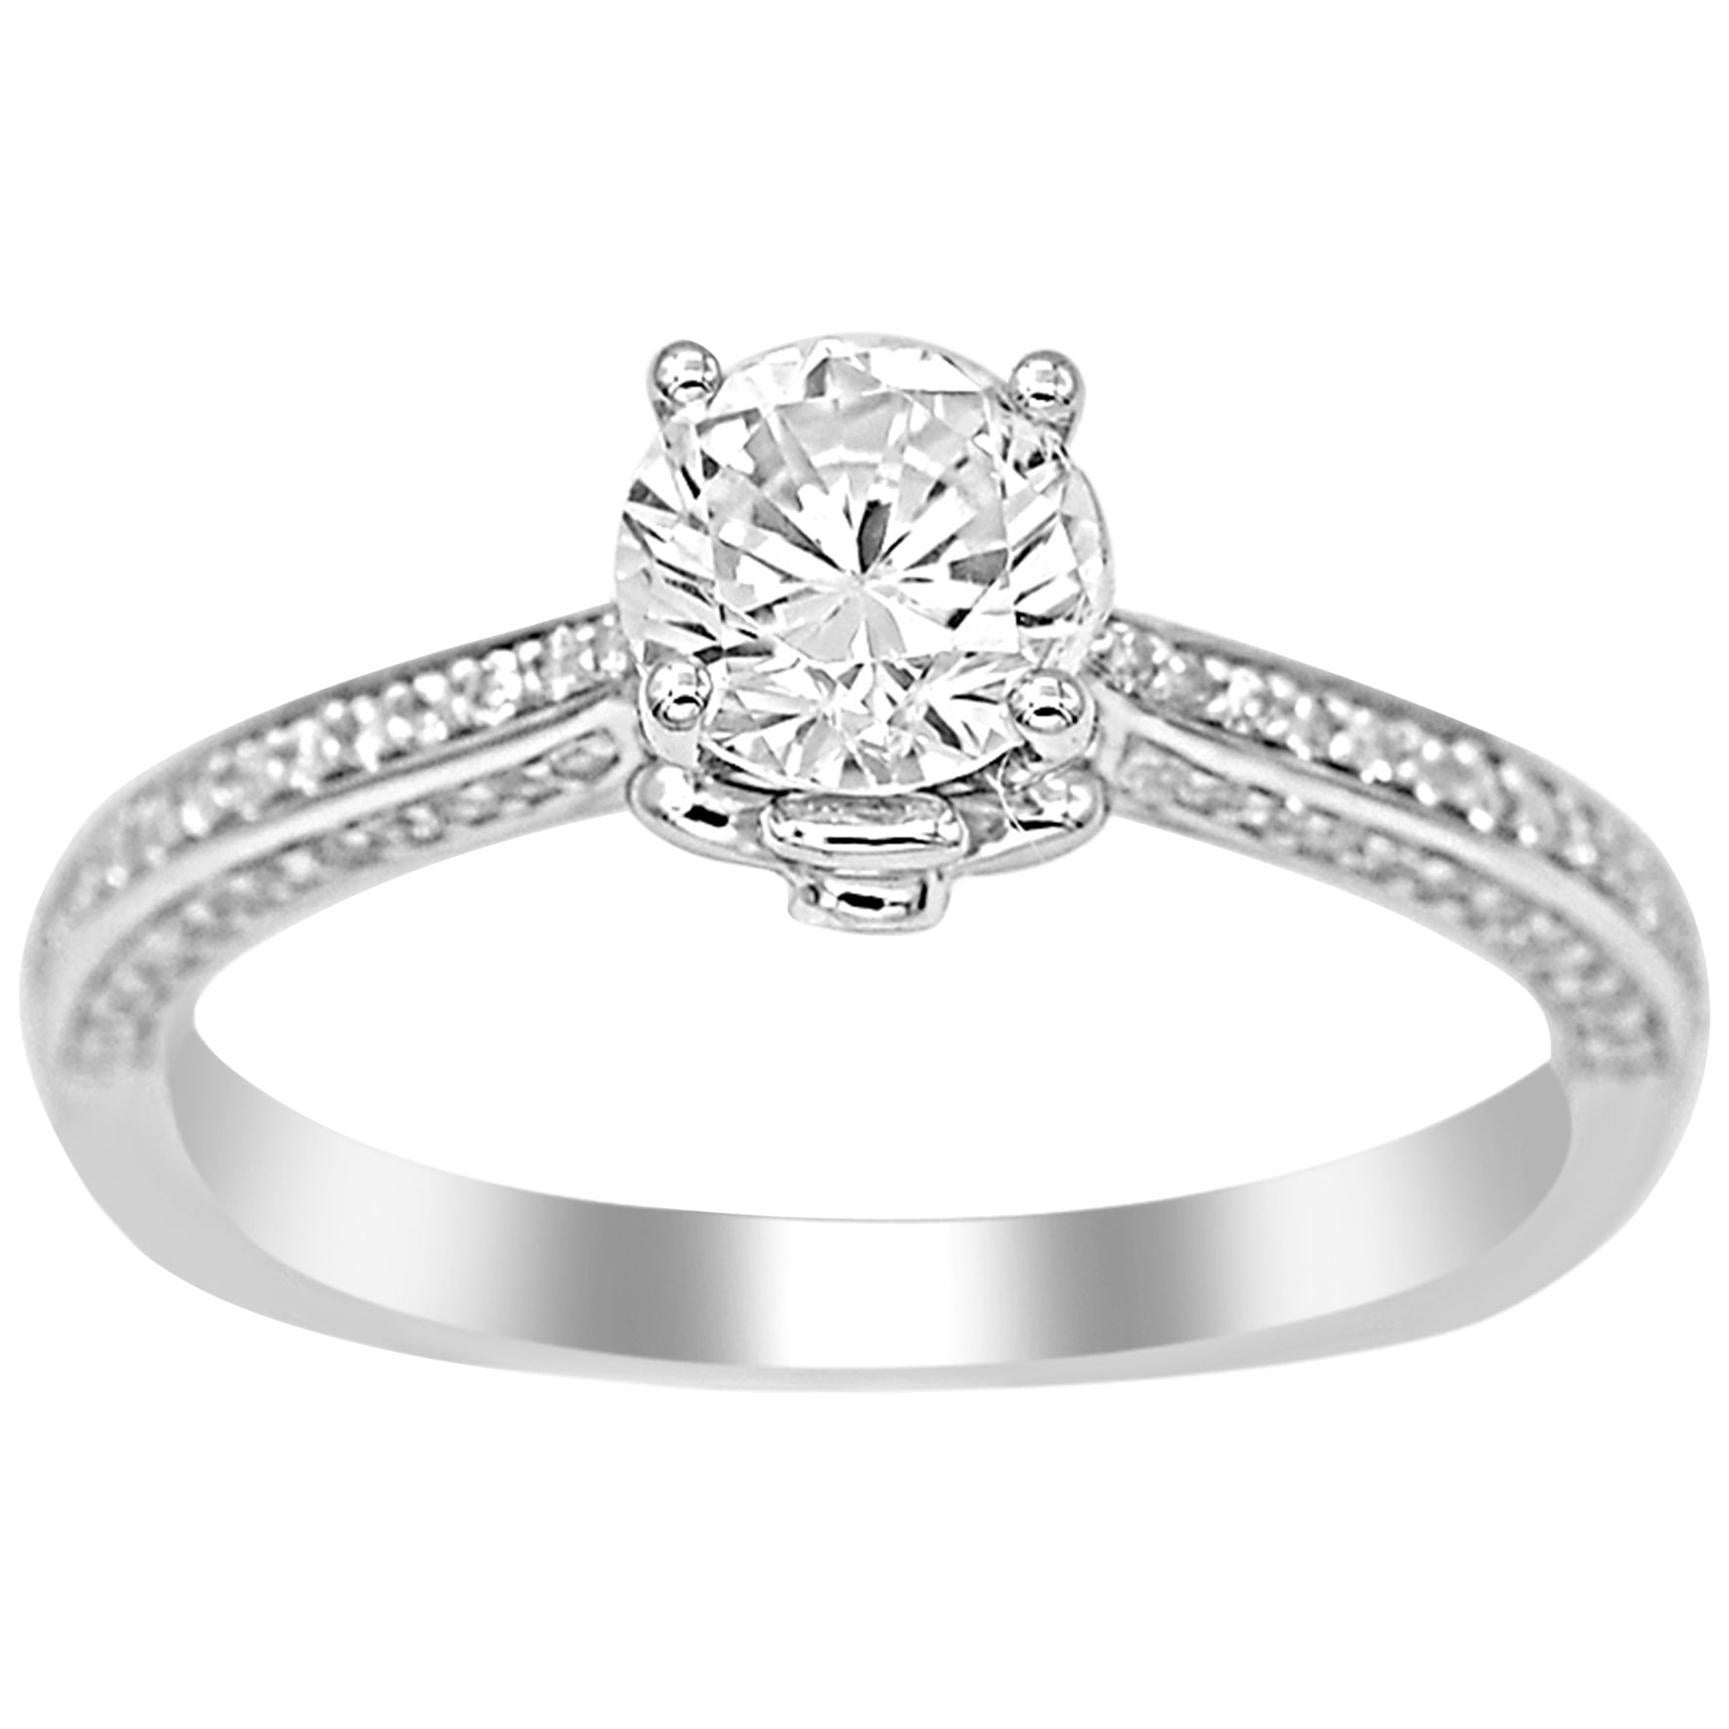 TJD 1.00 Carat Round Diamond 18K White Gold Engagement Ring with Shoulder Stones